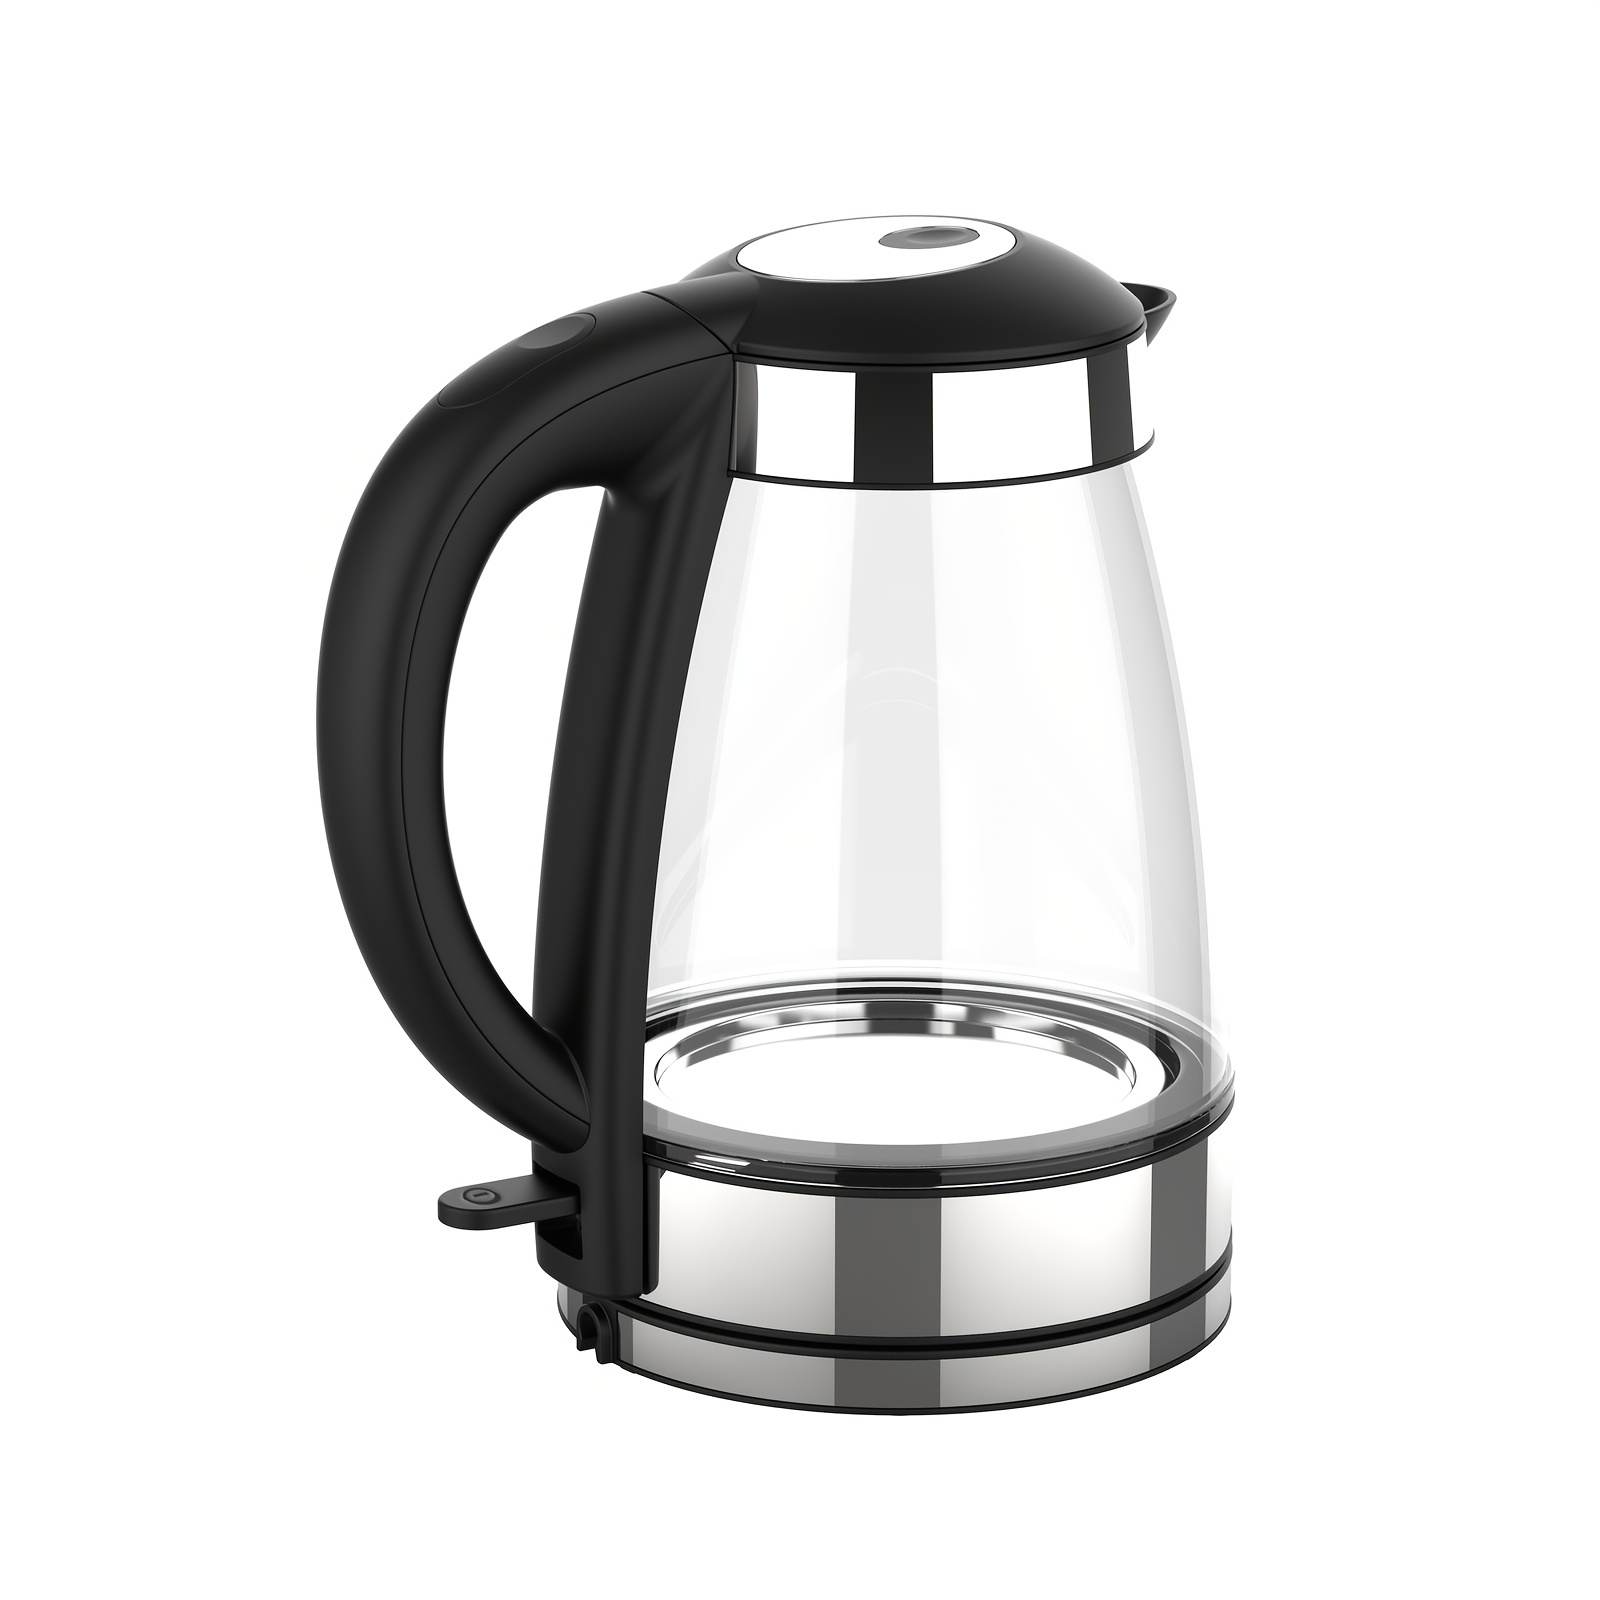 800ml Electric Kettle Automatic Steam Spray Teapot with Filter Multifunction Glass Health Pot Thermo Pot Home Boil Water Kettle, Size: 210